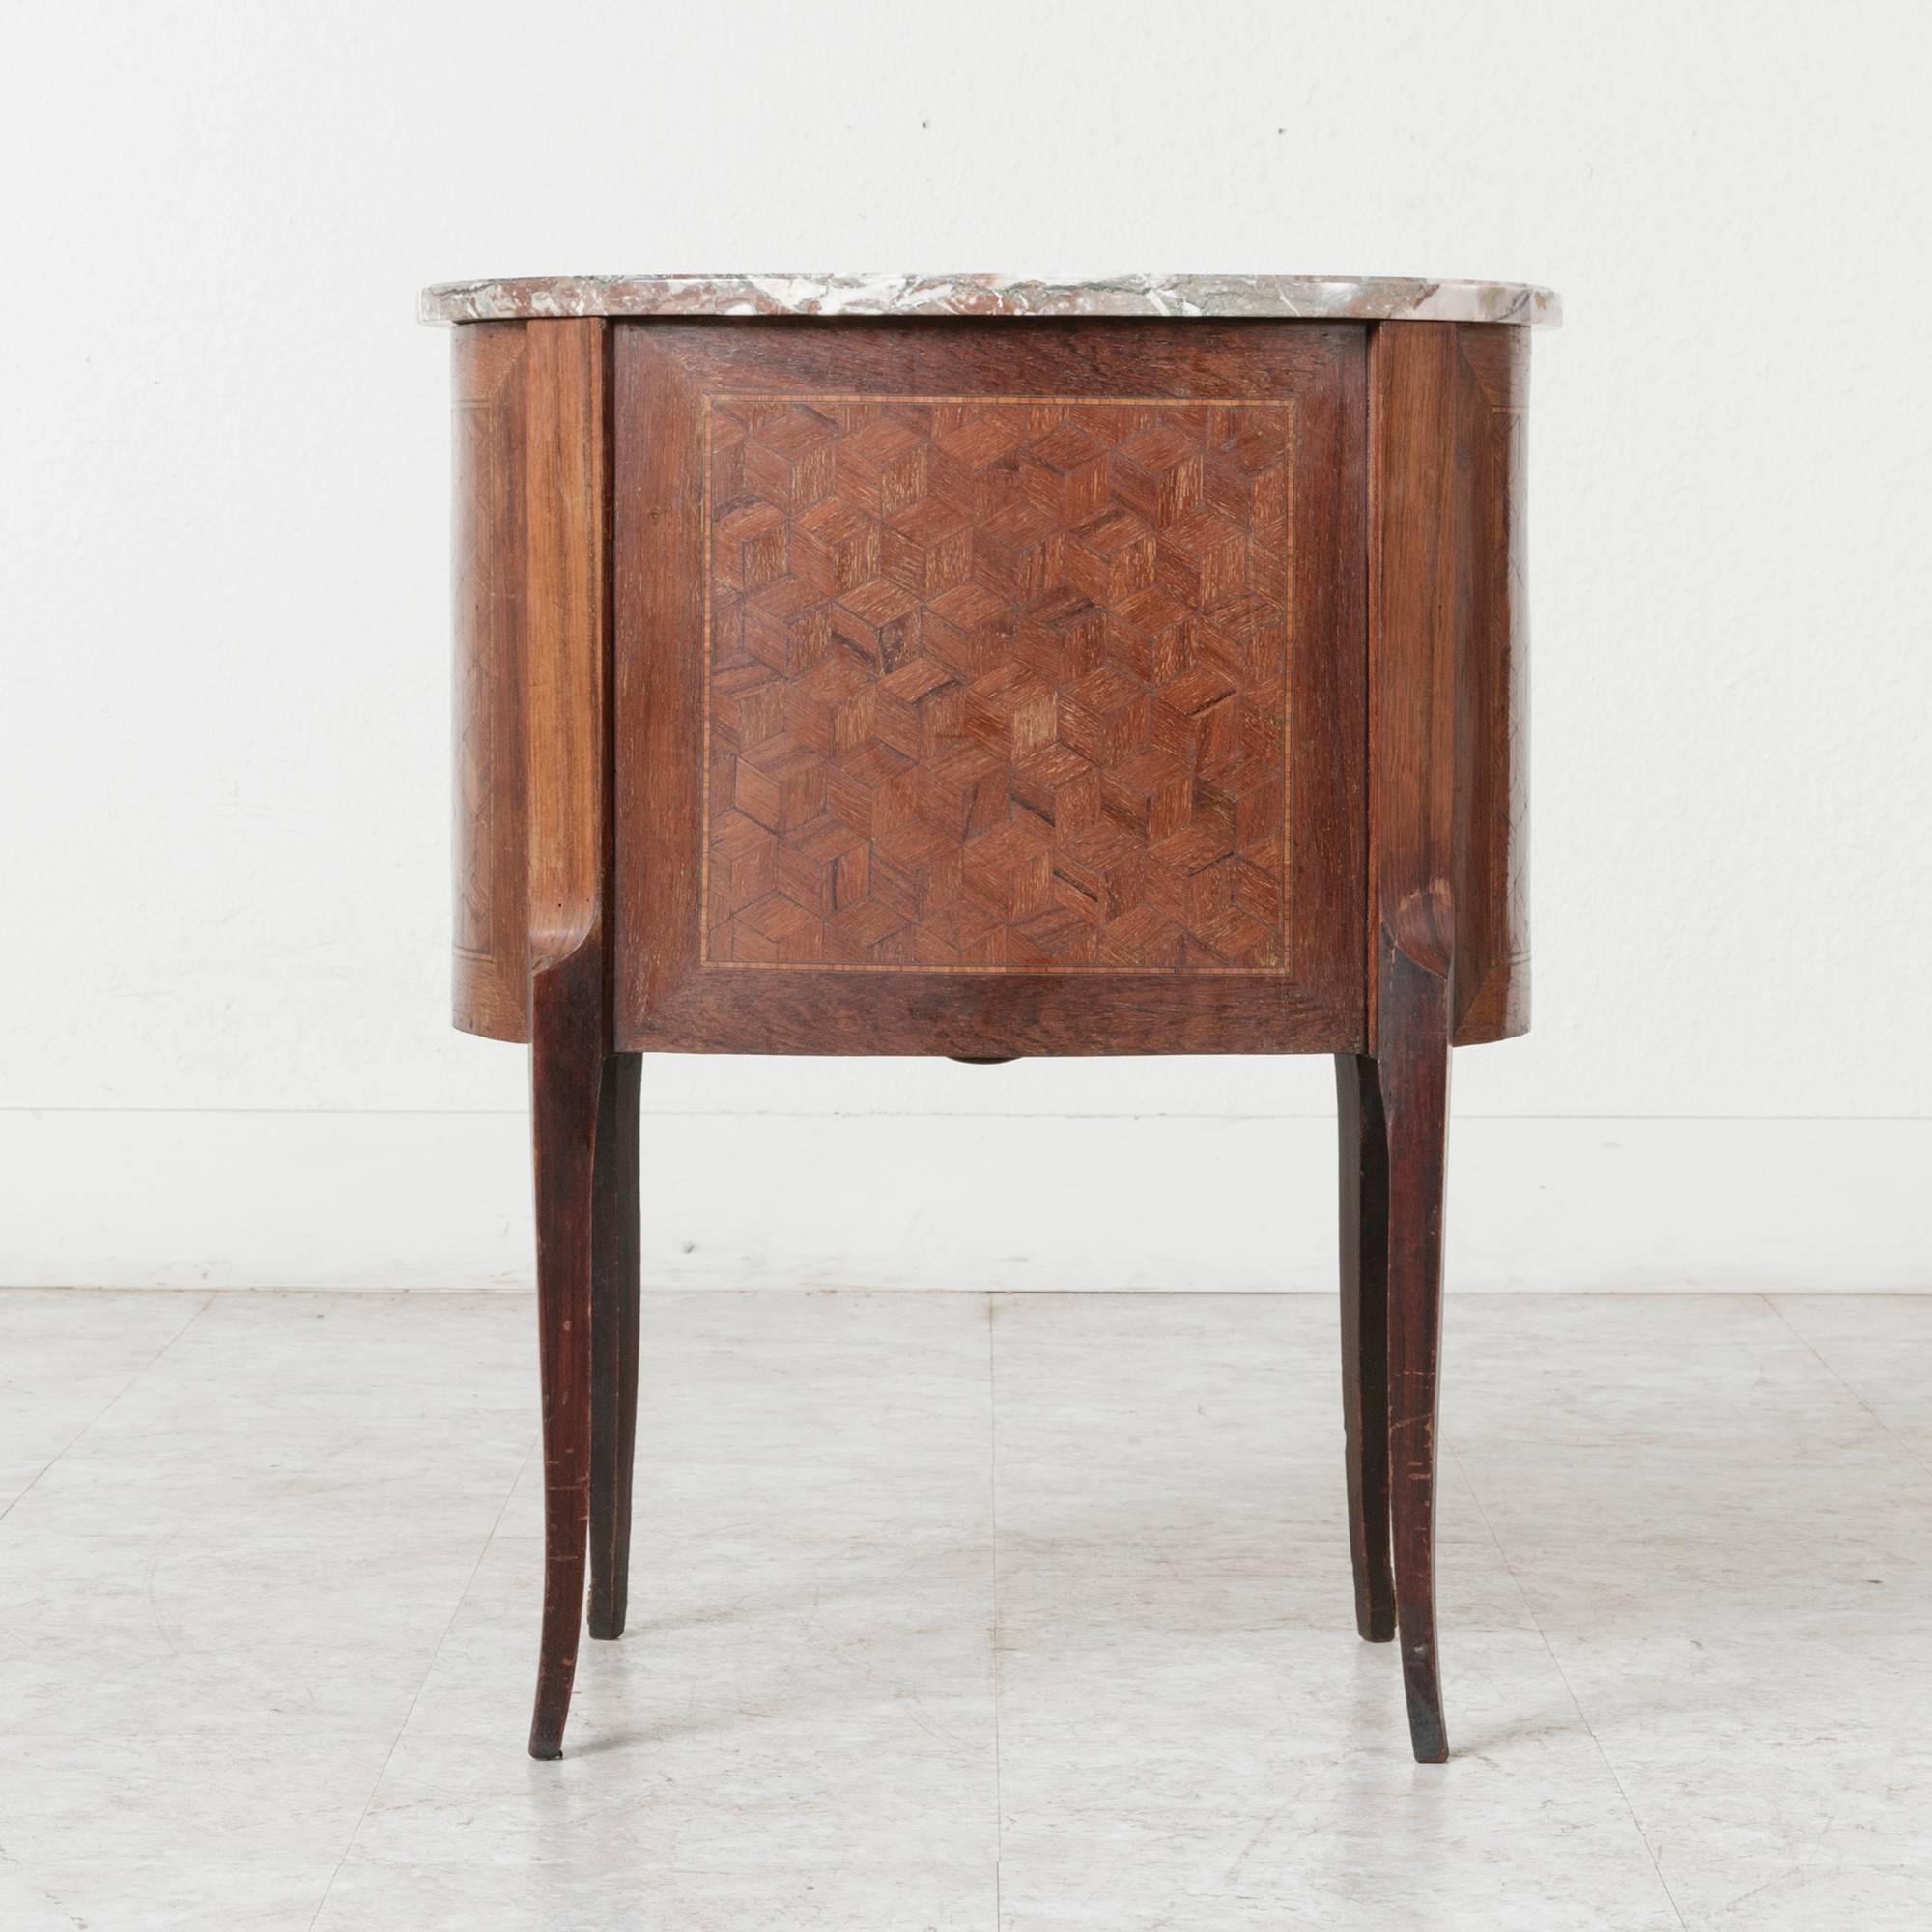 This finely detailed petite commode features a kidney shaped breccia marble top on a conforming case. With inlaid geometric parquetry on all sides and bronze ormolu accents, this small chest will make an elegant nightstand or floating side table.